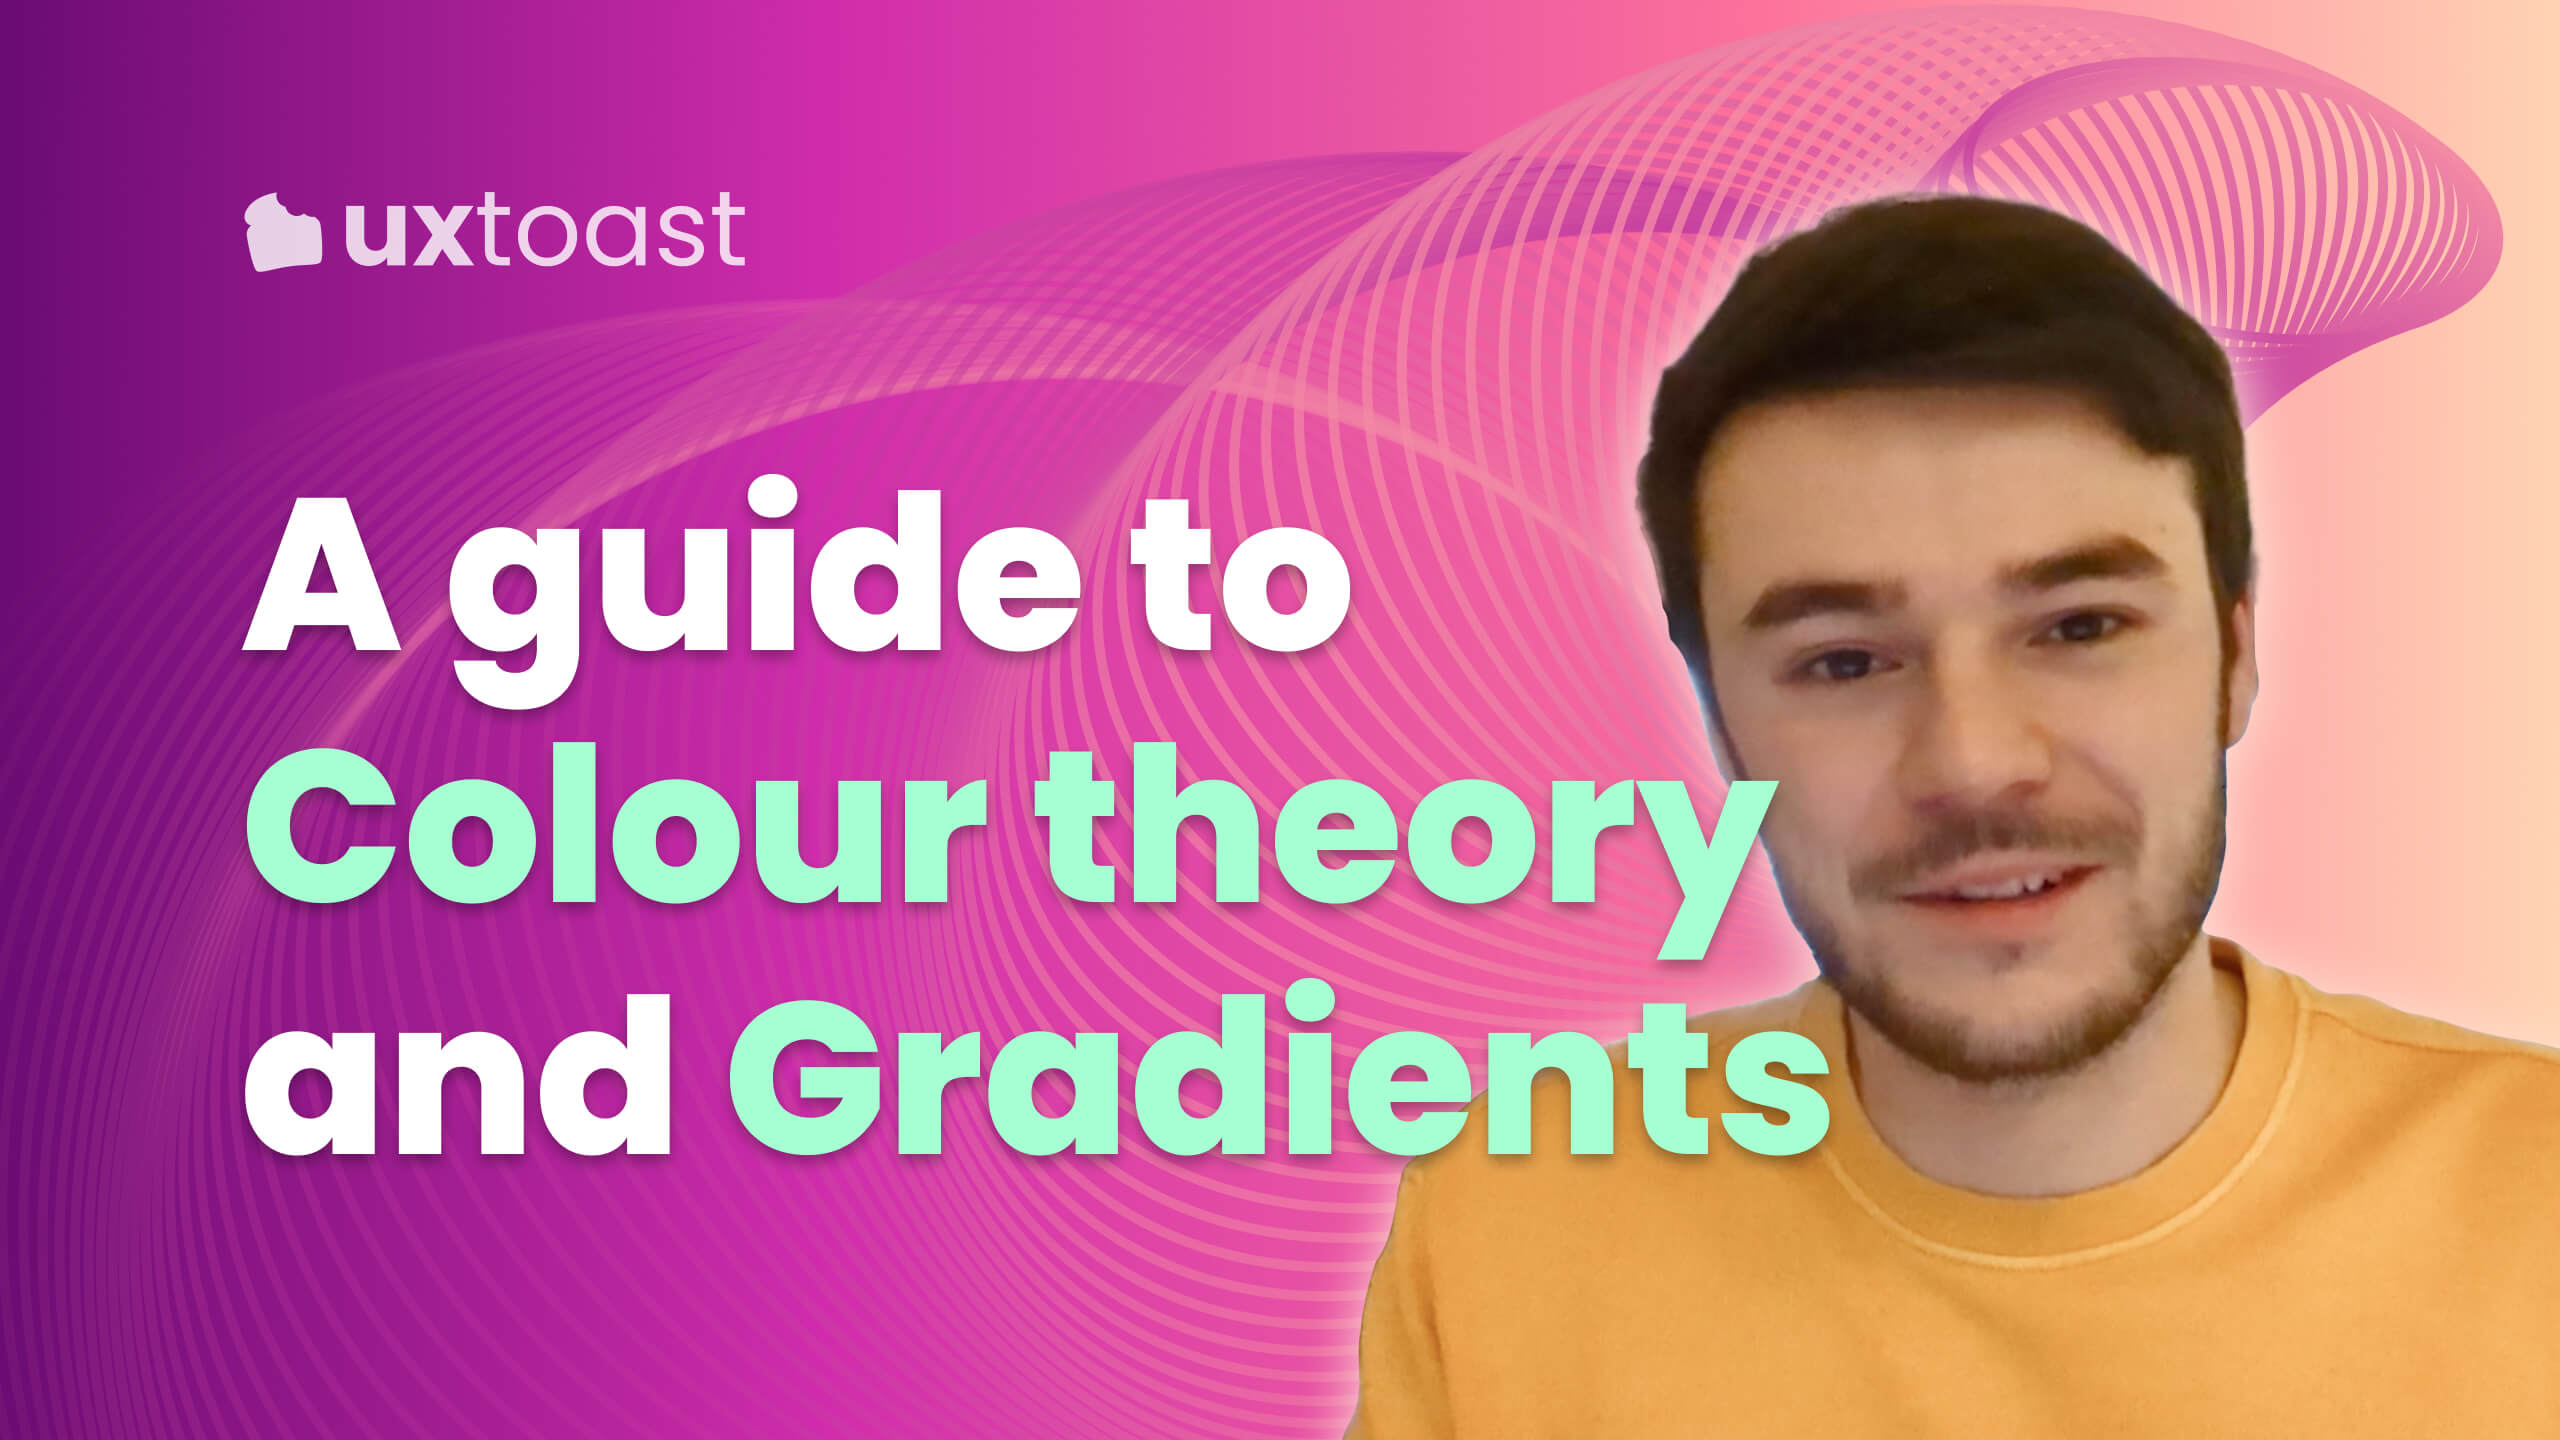 Colour theory and gradiants